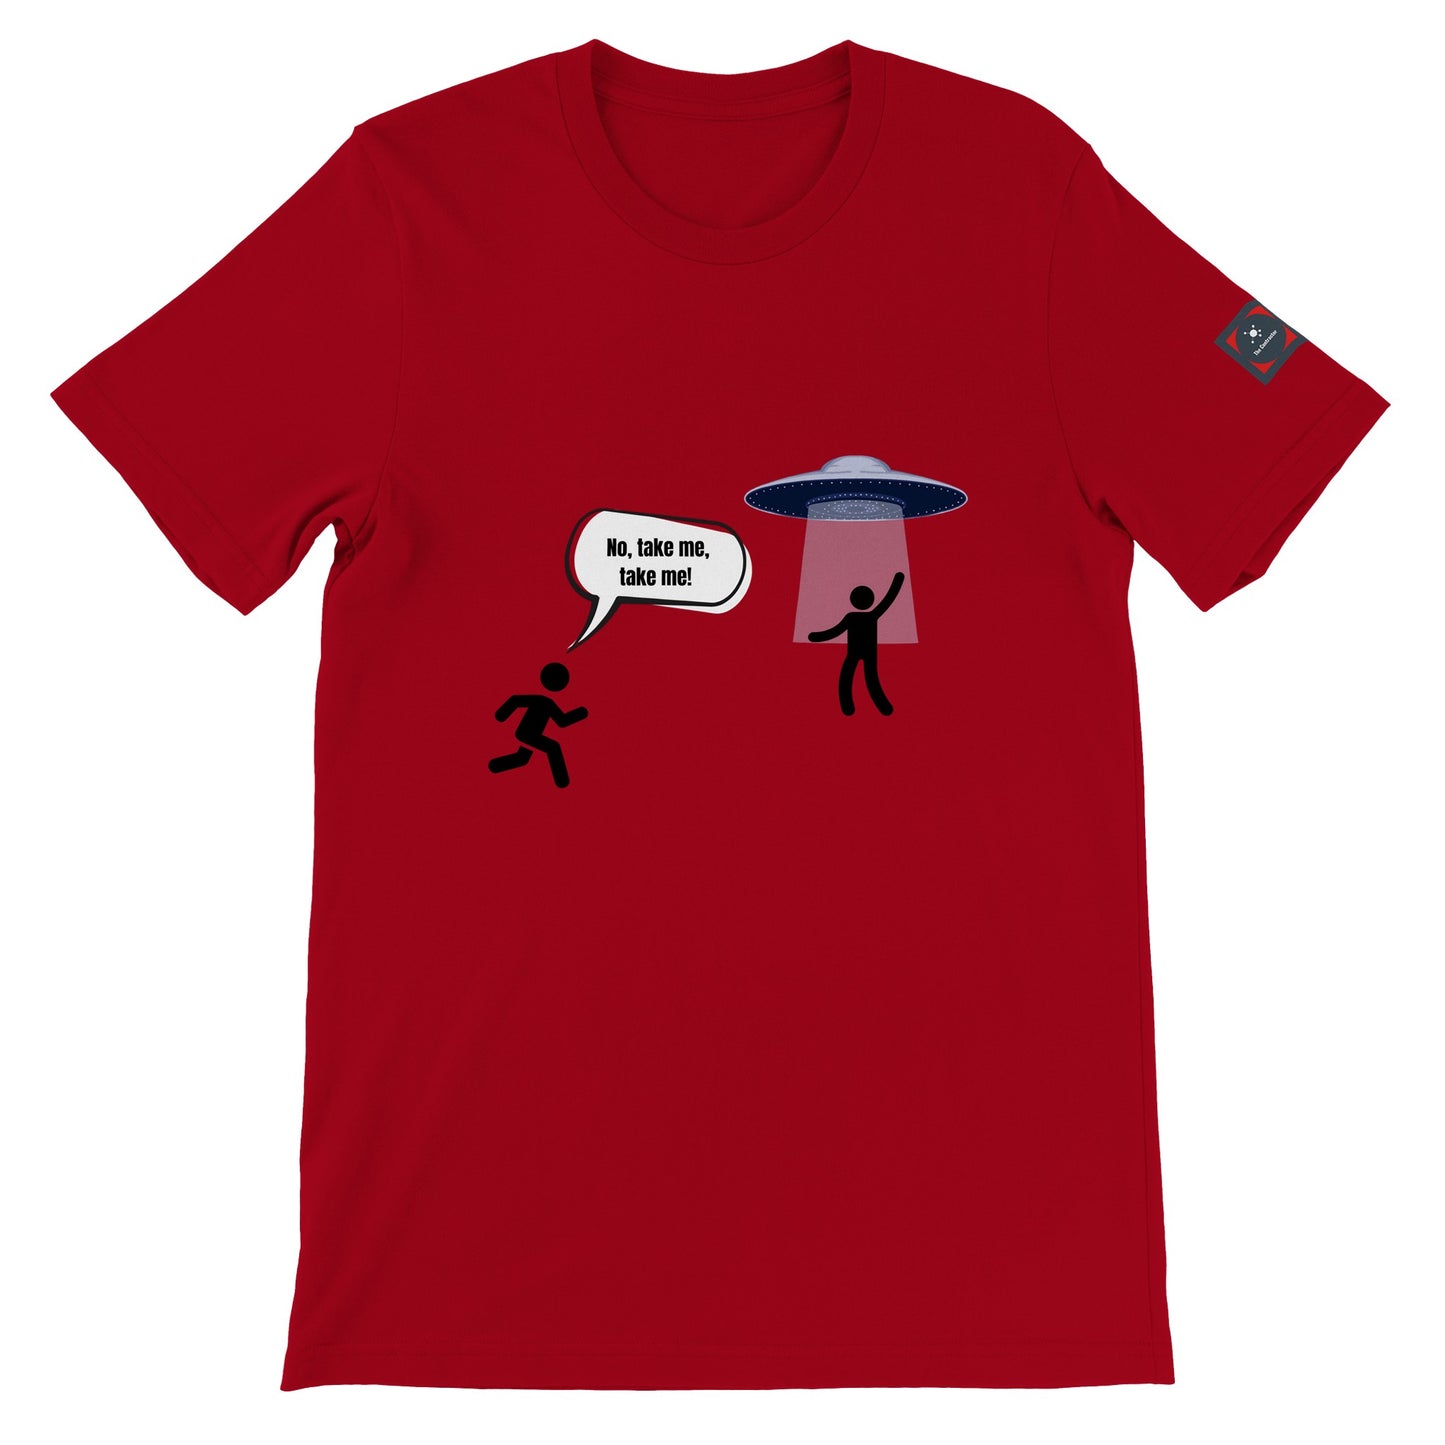 Enthusiastic Abduction T-Shirt